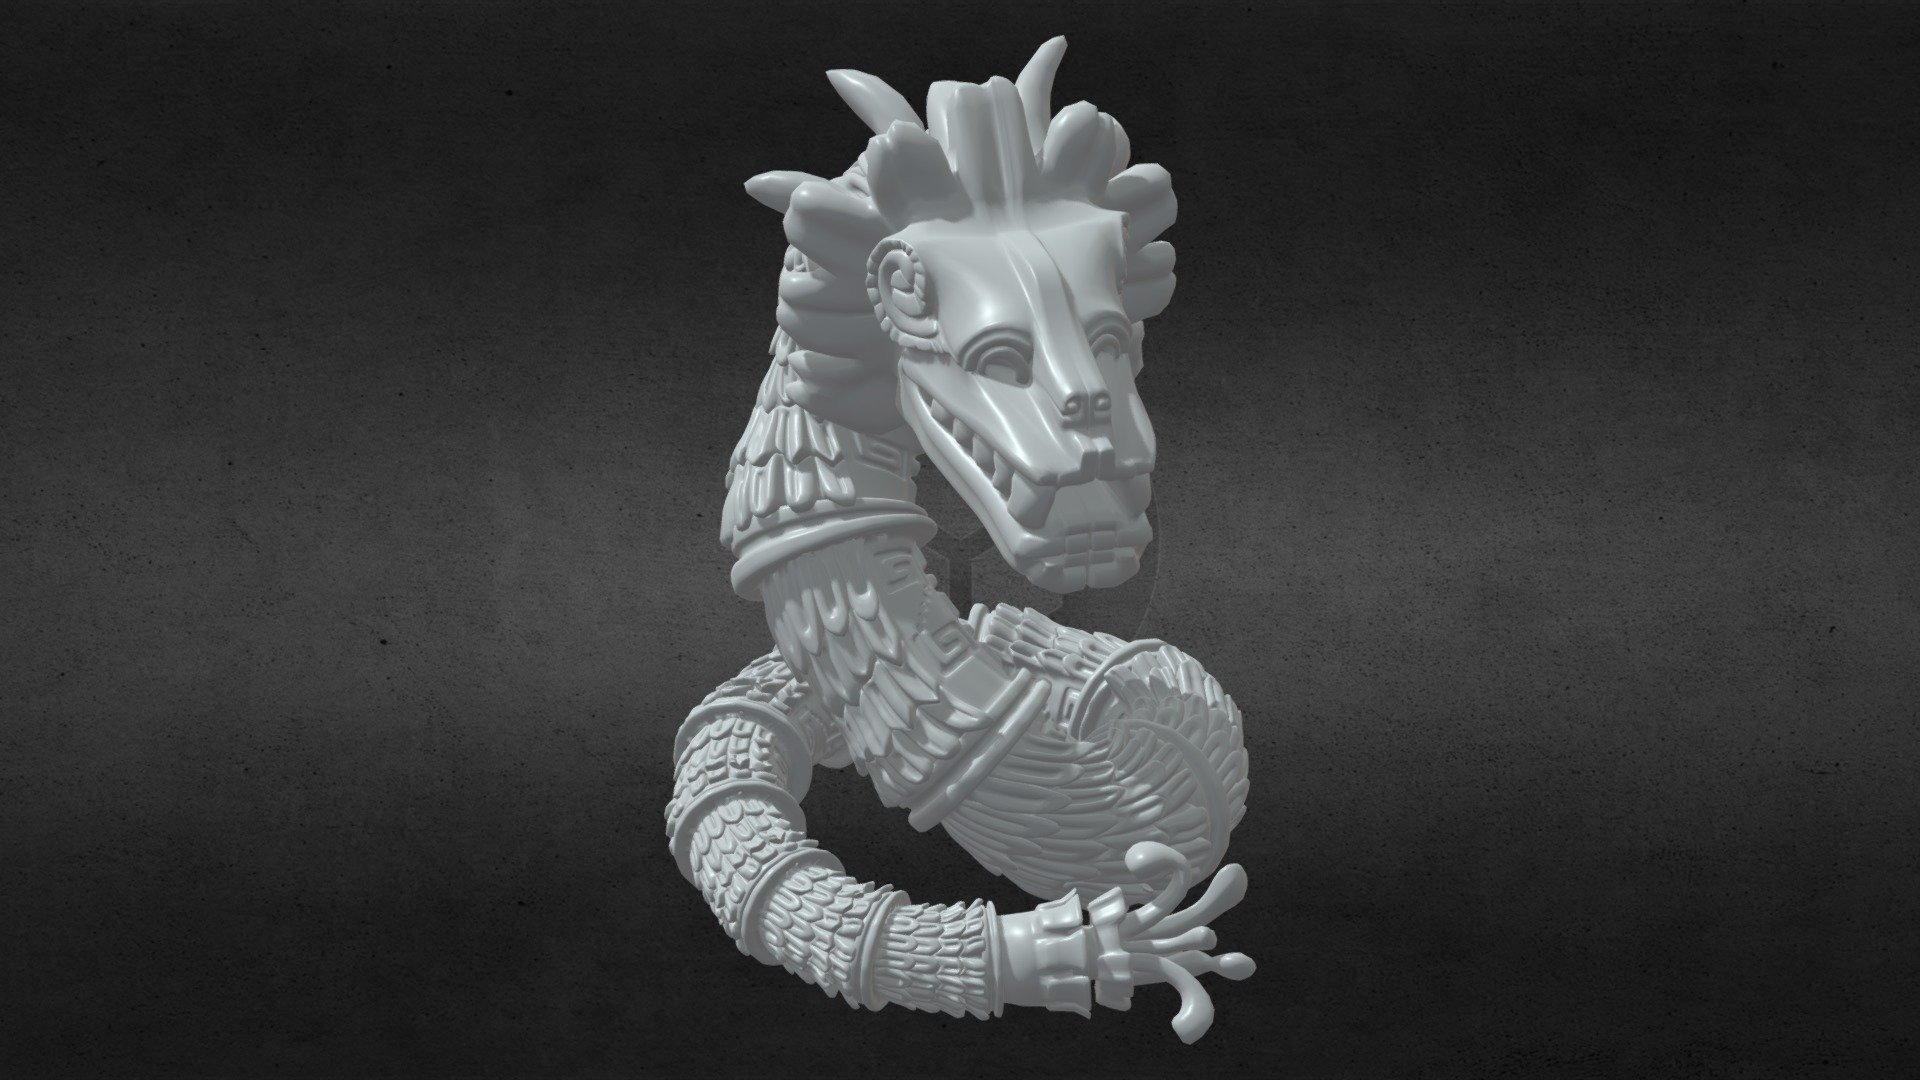 Quetzalcoatl God, entry in the sketchfab and photoshop contest.
Based on the Quetzalcoatl Temple heads, of Teotihuacan “the city of gods”,  I decided to create a full body statue of the prehispanic god that promised to come back 3d model